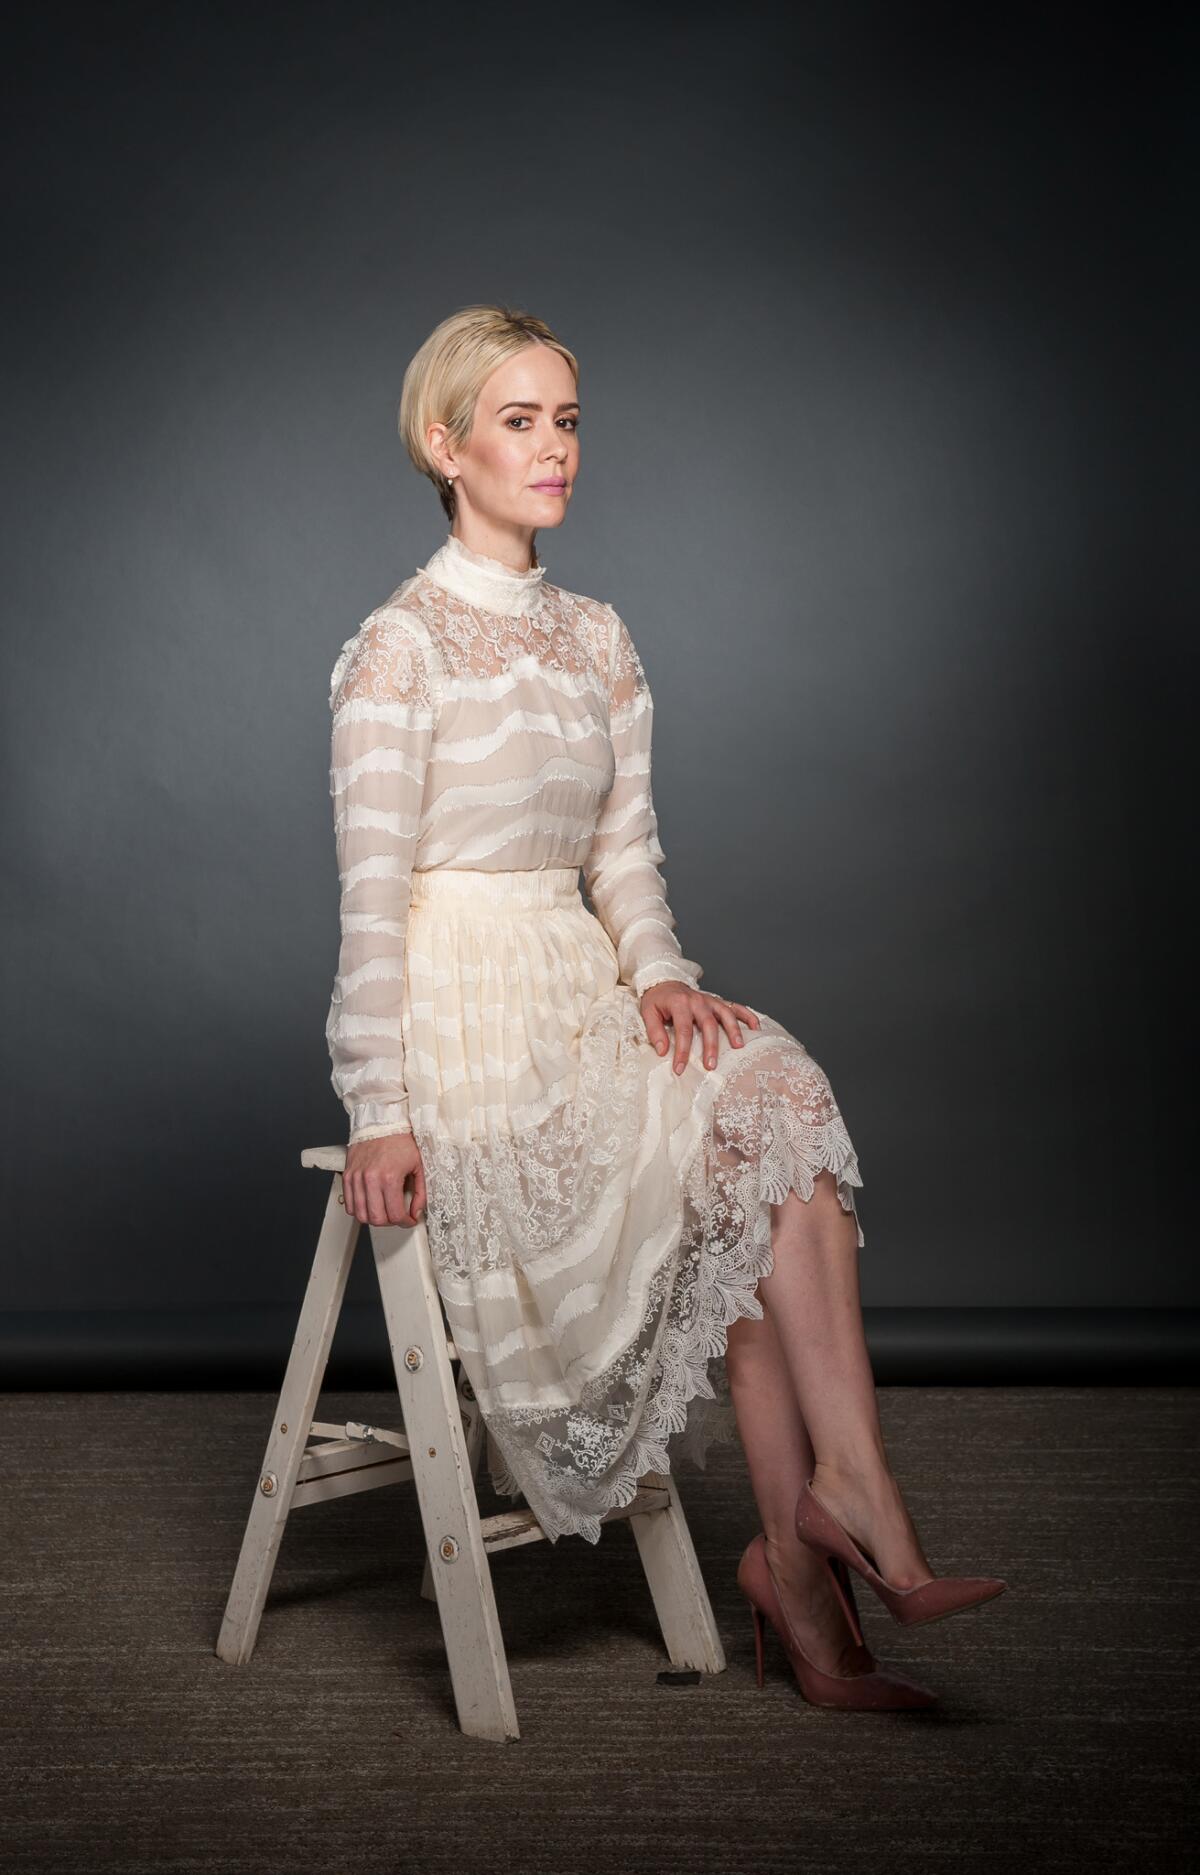 Sarah Paulson, who played Marcia Clark, says filming on the courtroom set in front of background performers was "a little bit like doing a play with all the lights on." (Christina House / For The Times)